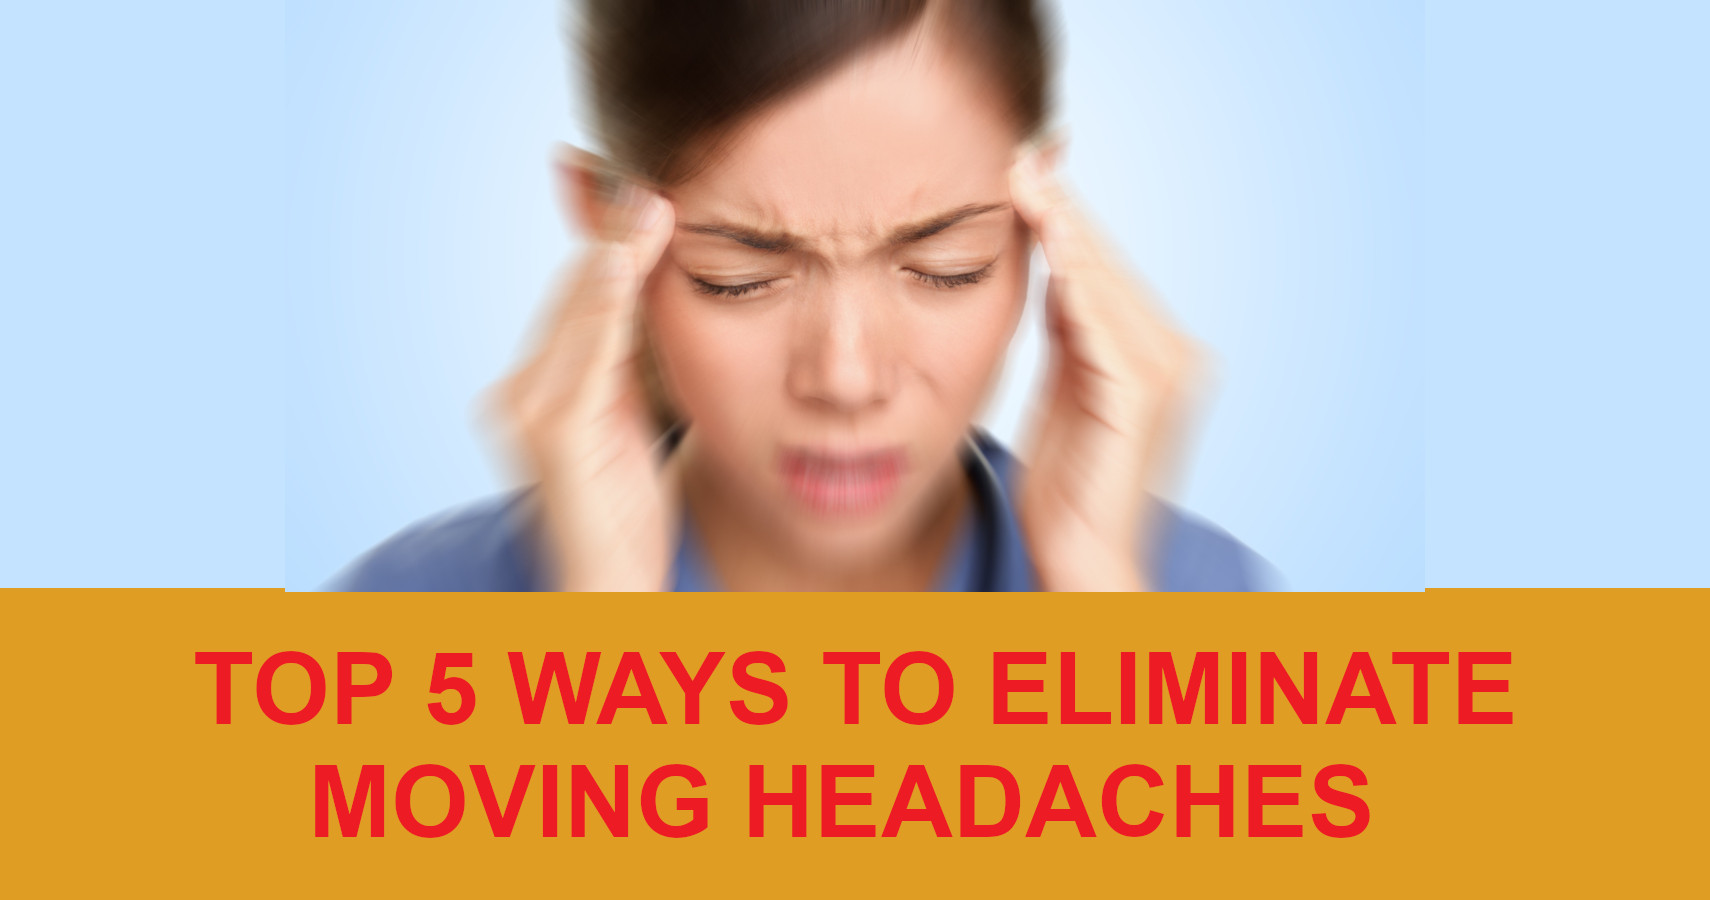 Top 5 ways to eliminate moving headaches